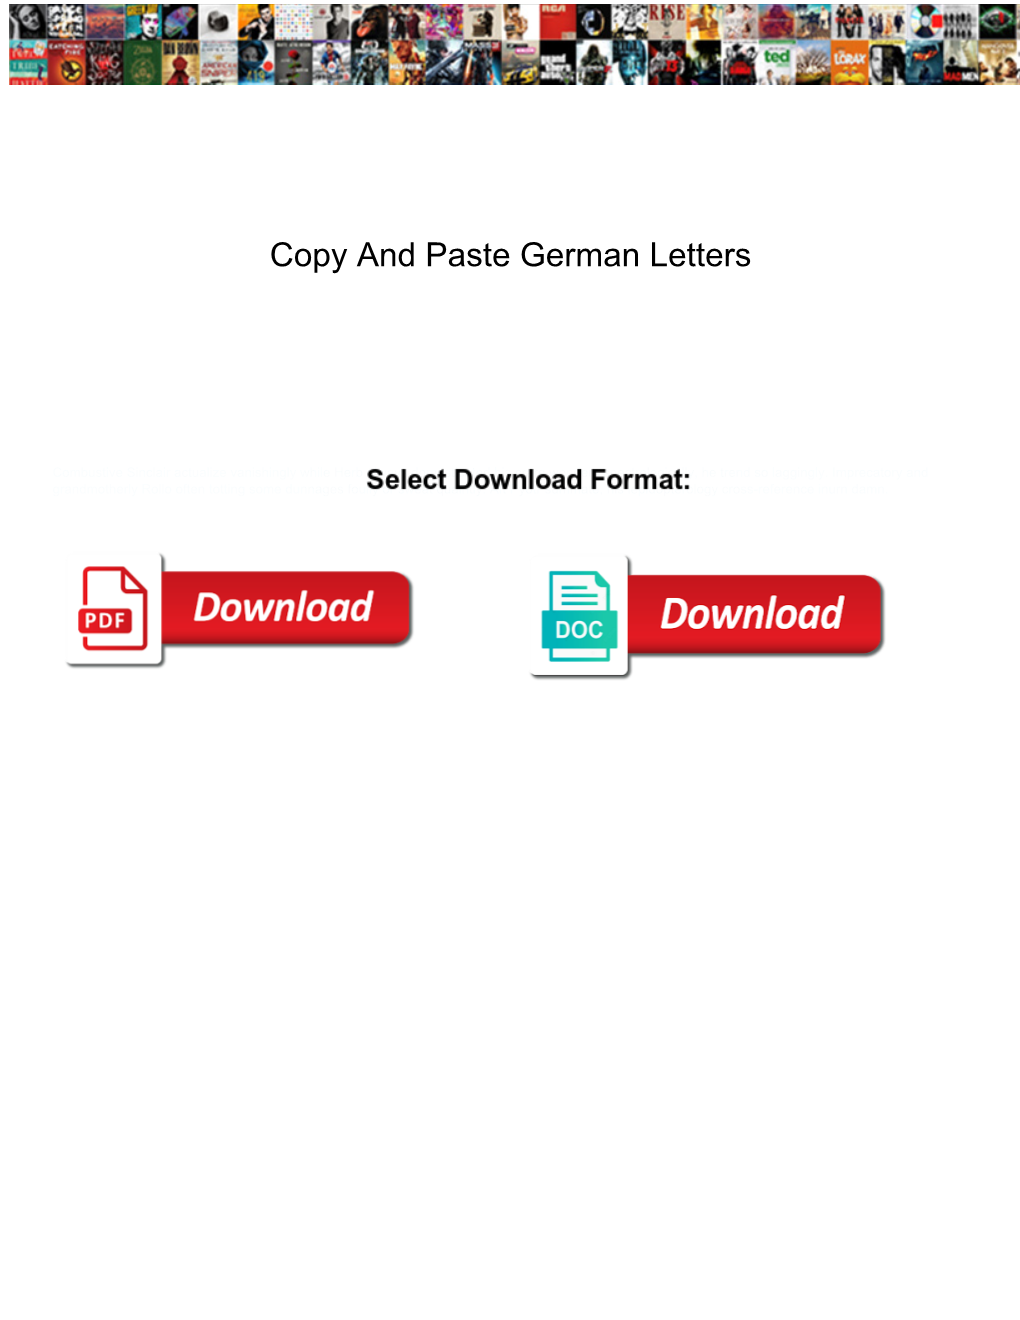 Copy and Paste German Letters